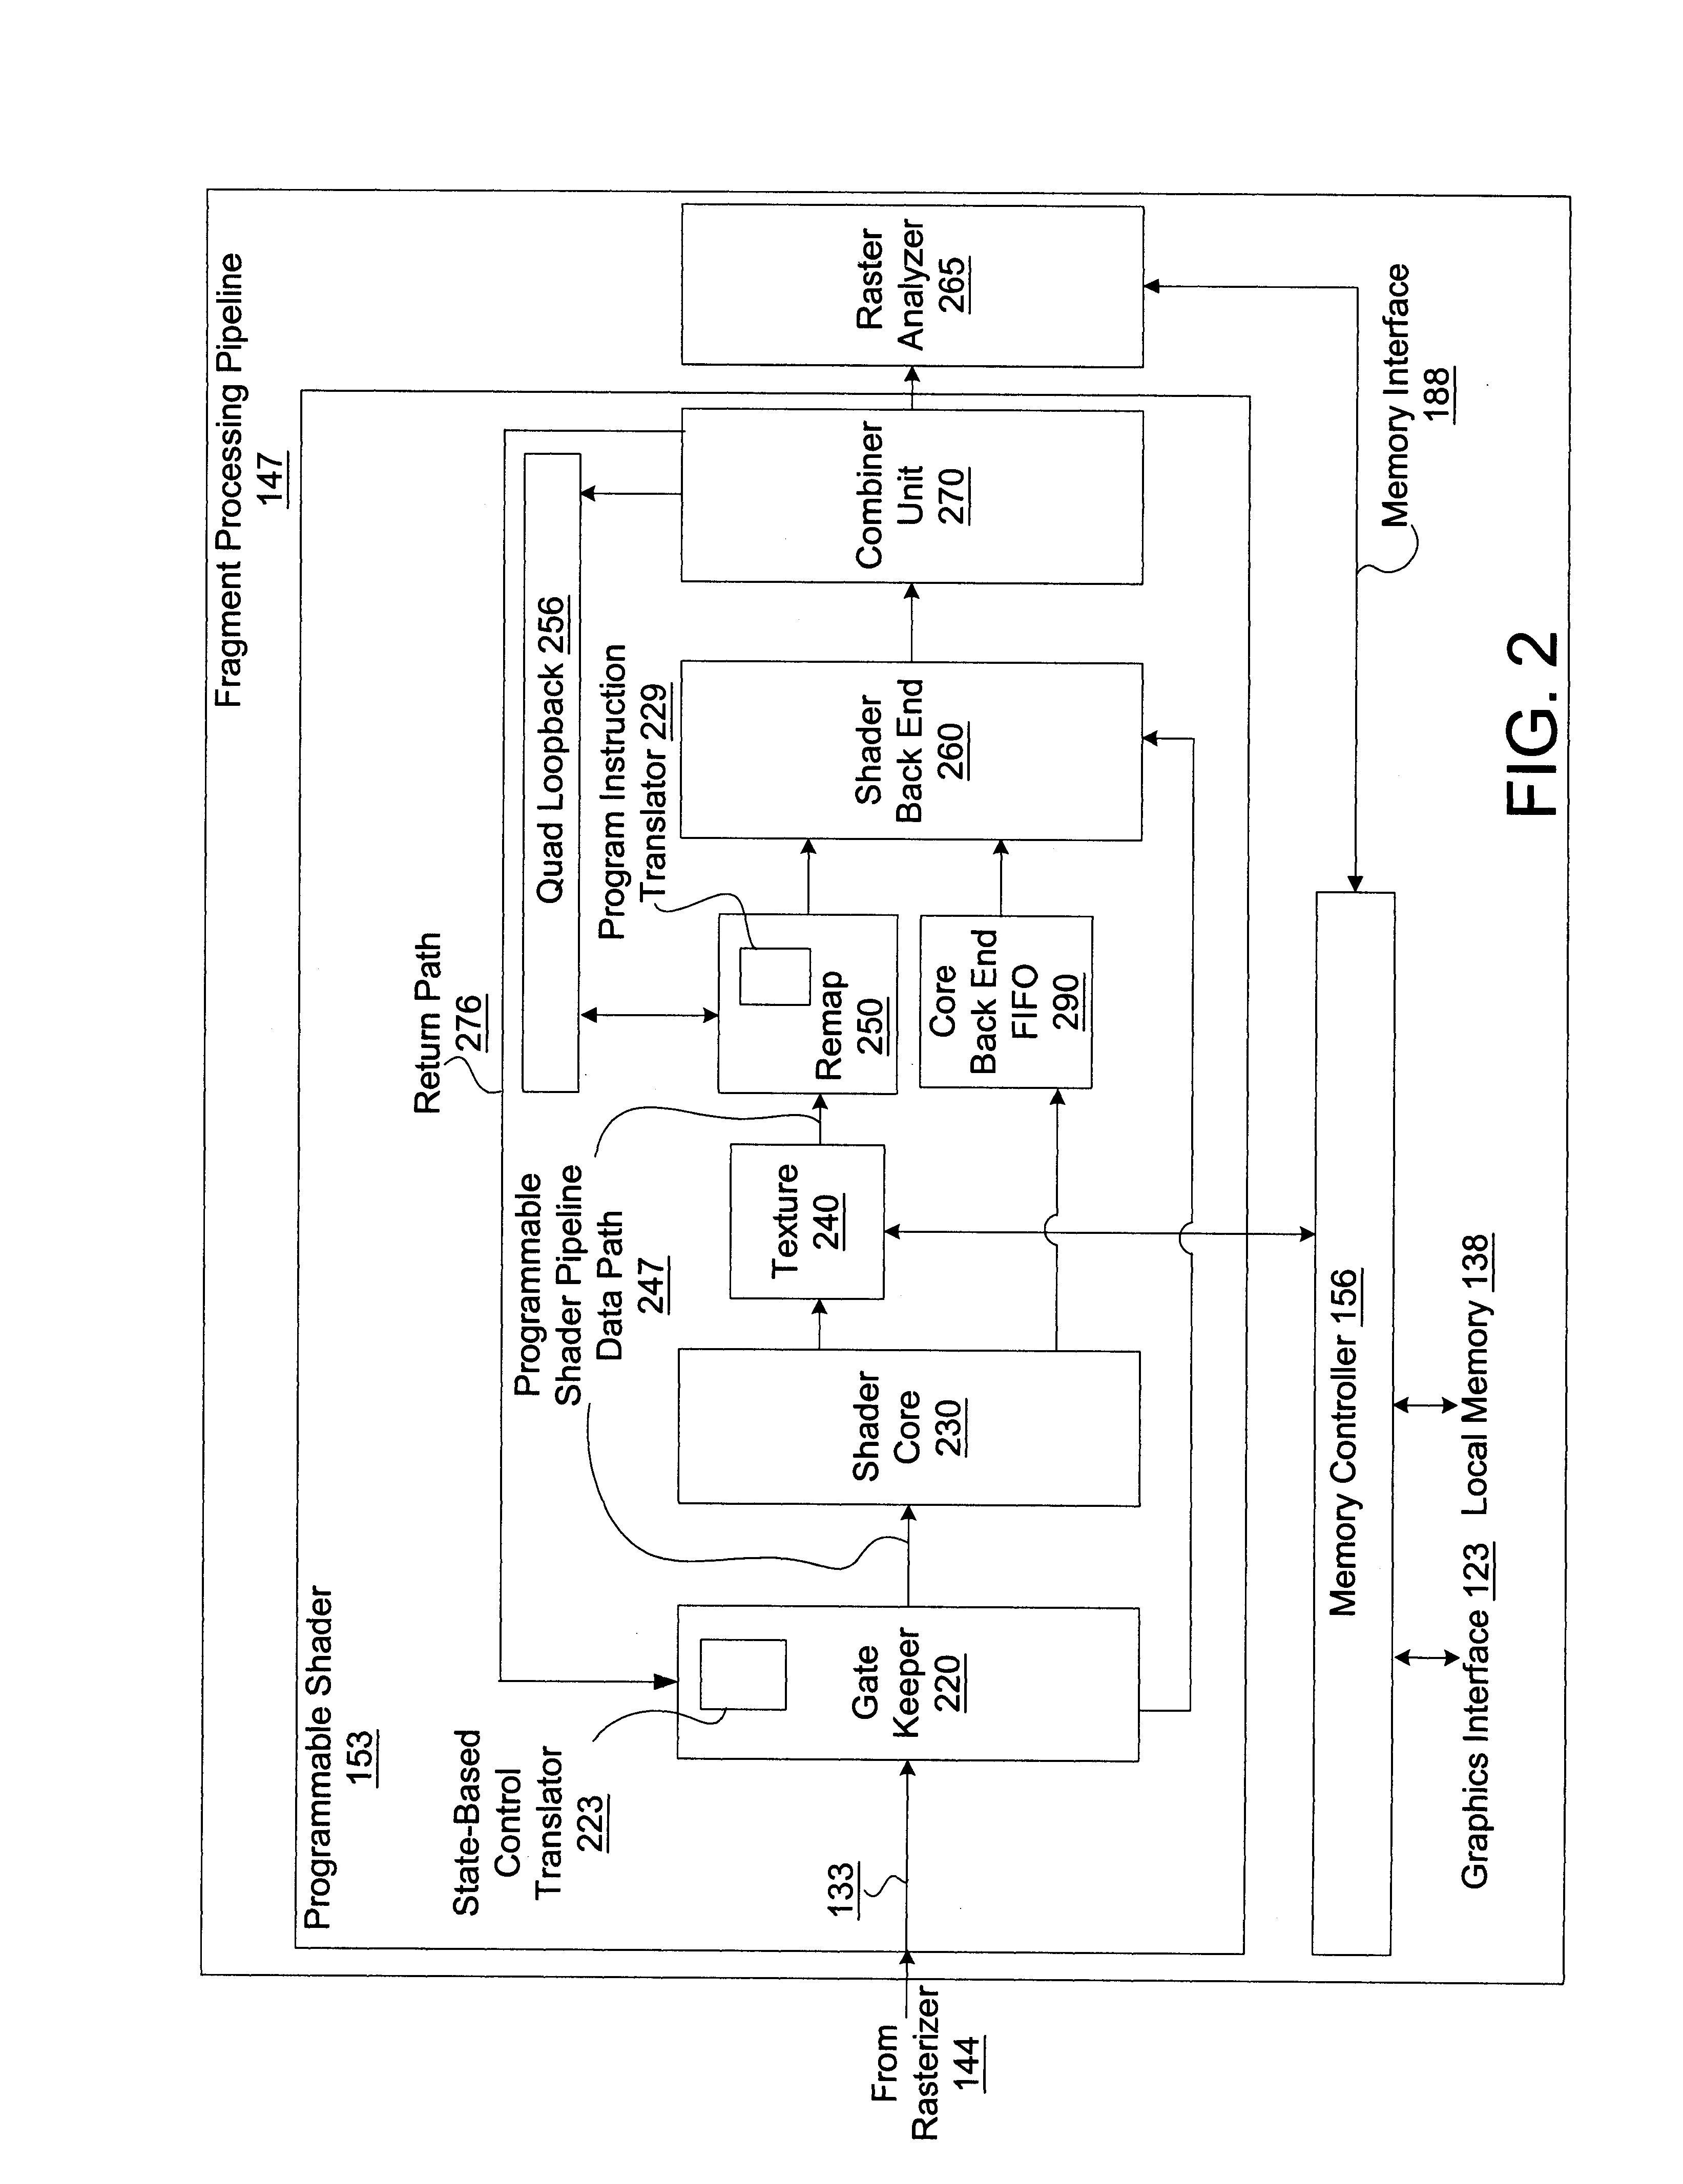 Method and apparatus for generation of programmable shader configuration information from state-based control information and program instructions